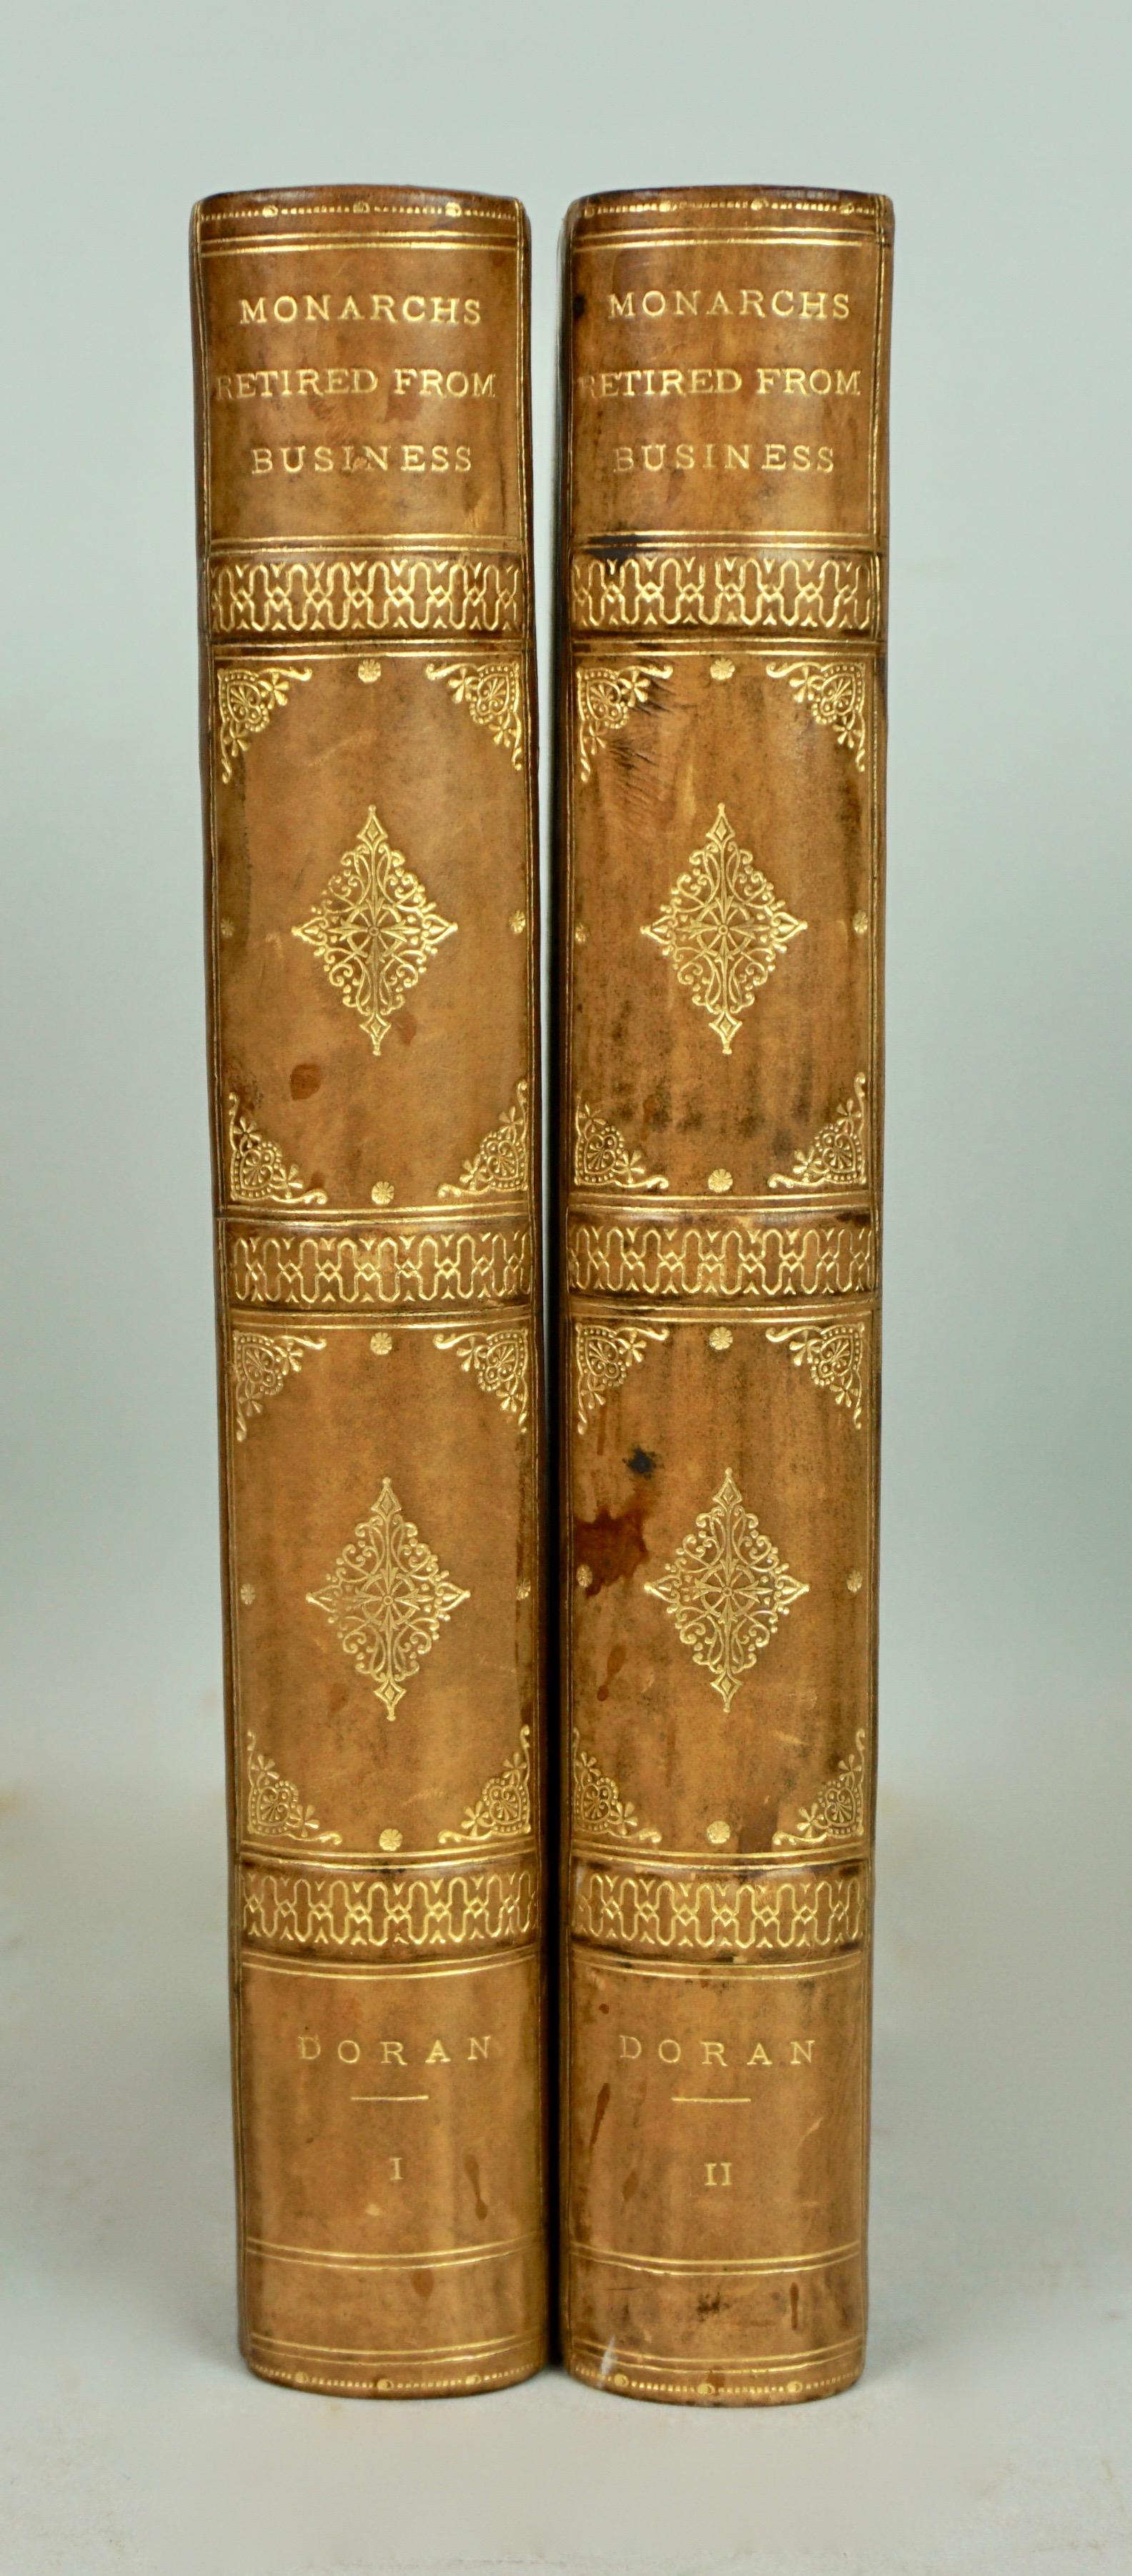 American Annals of Stage, English Queens, Retired Monarchs 6 Leatherbound Volumes